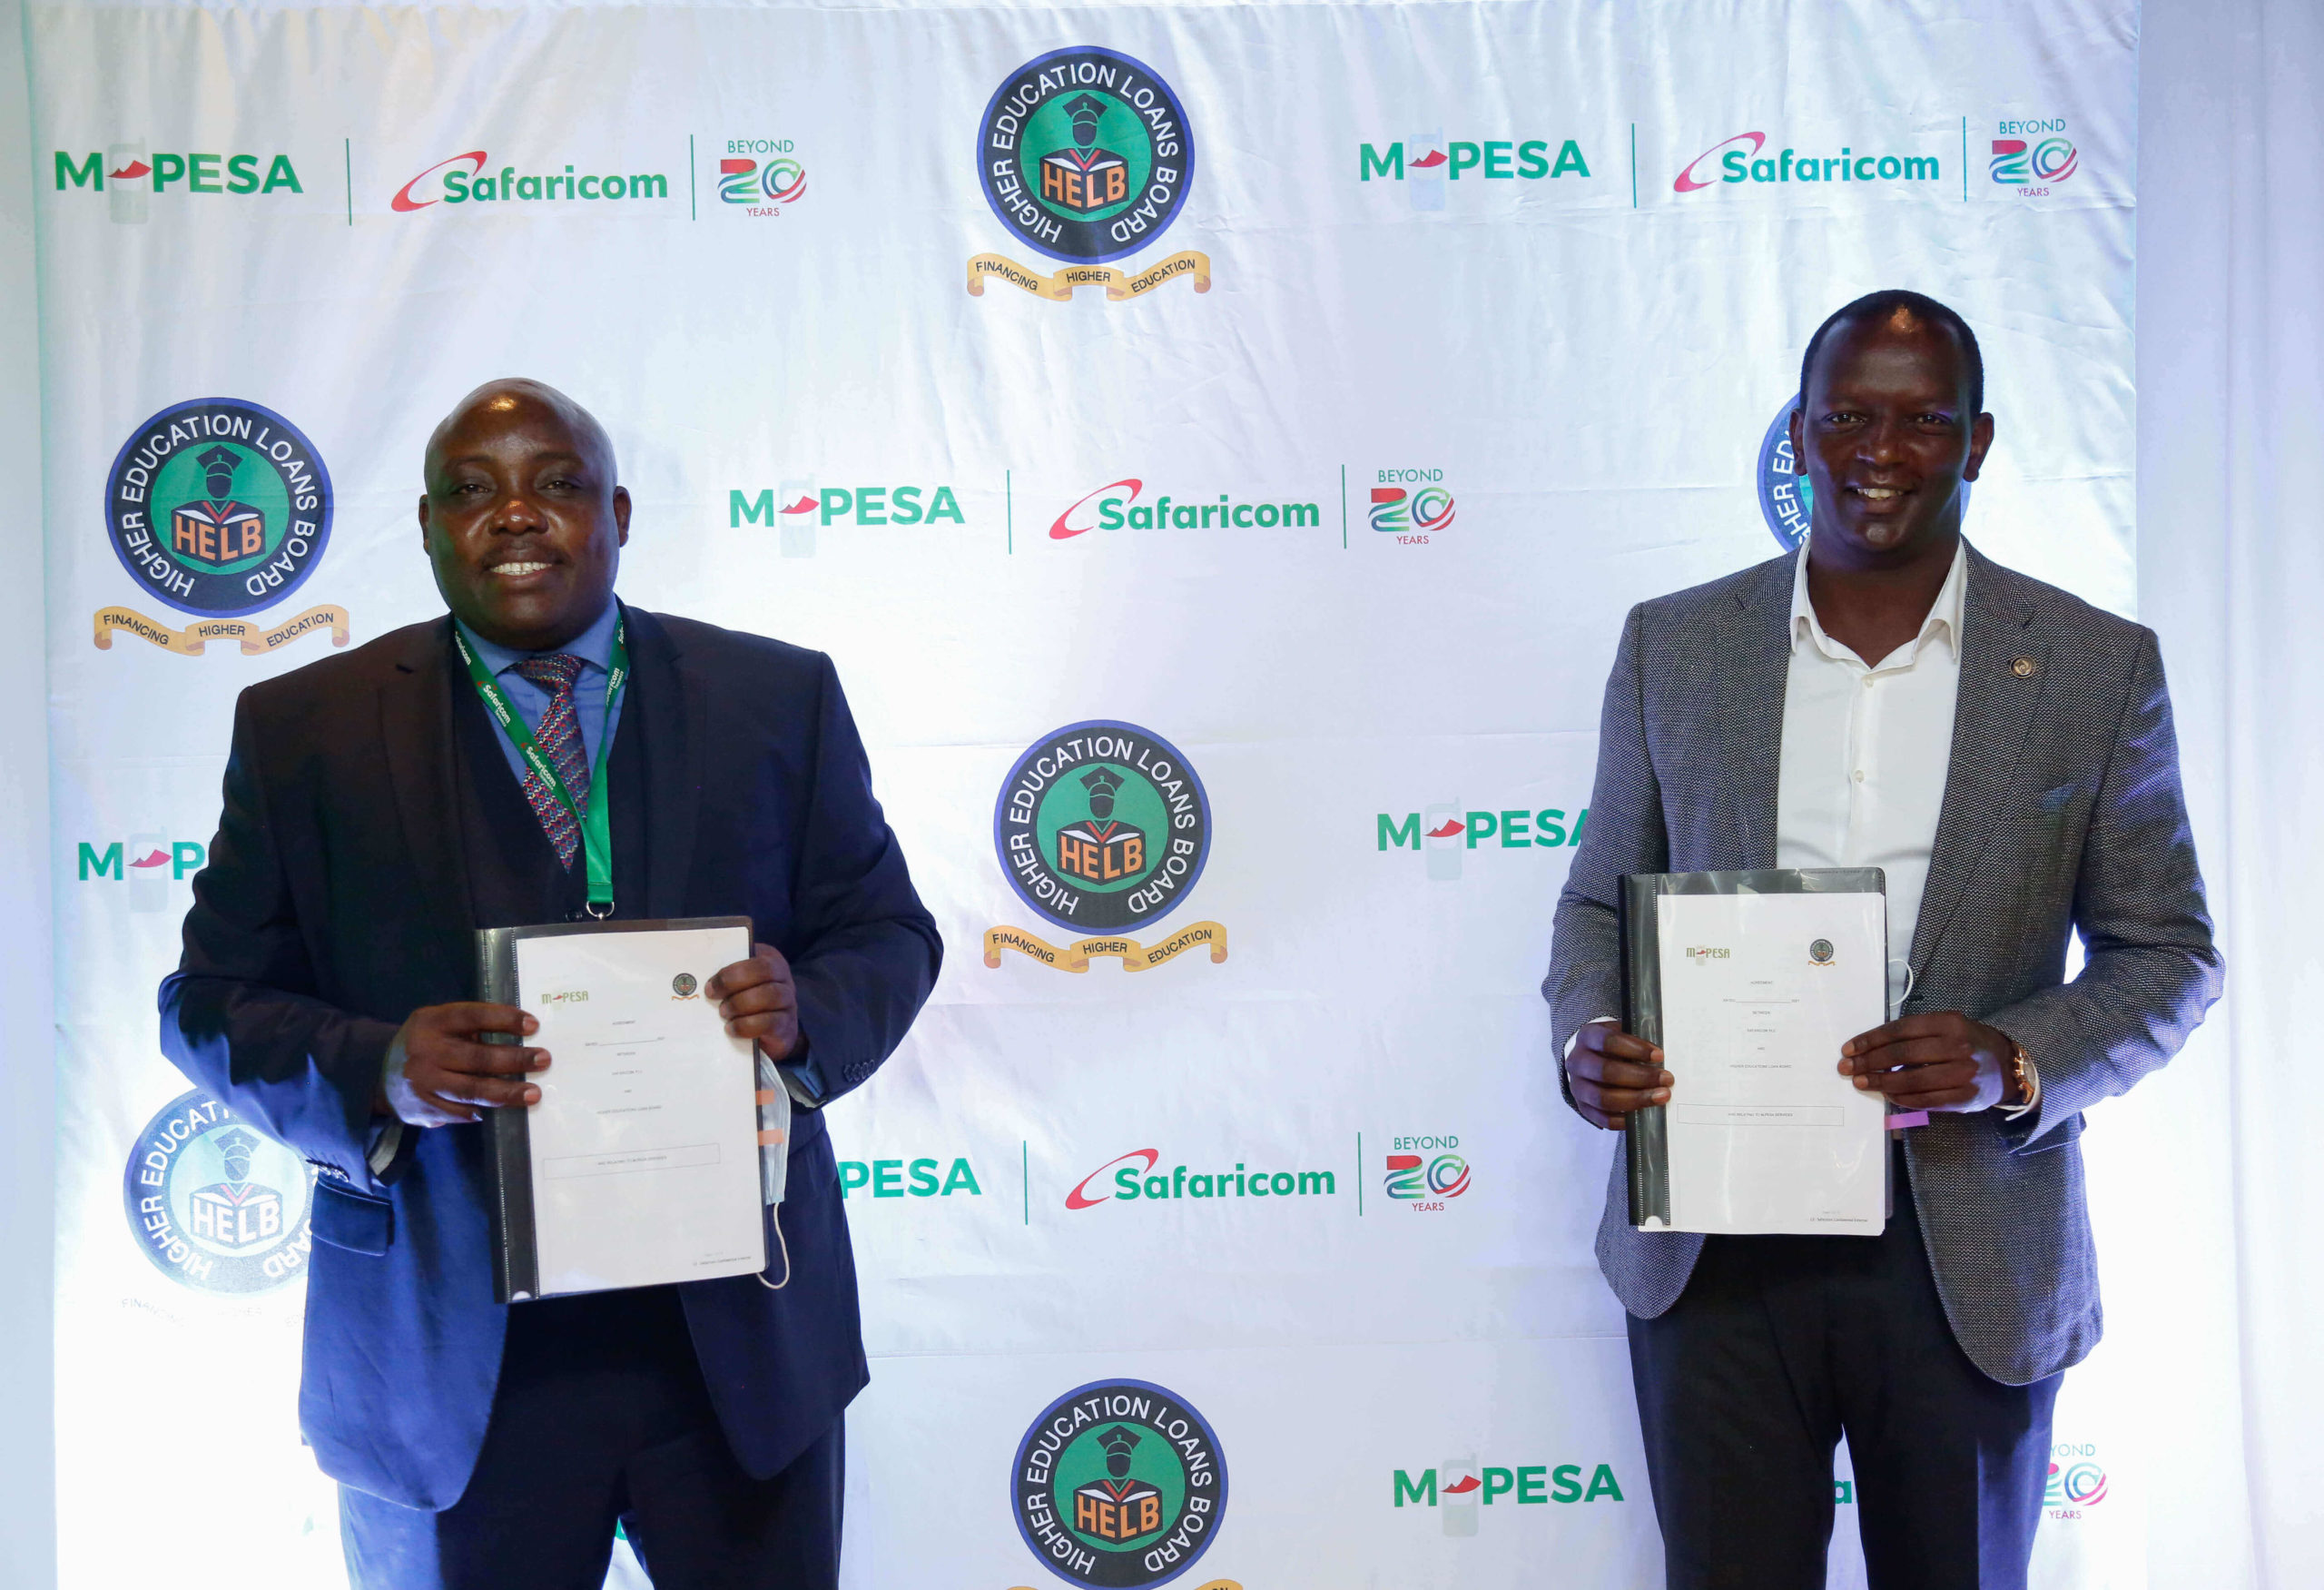 Students to access their HELB loans for the first time ever via their M-PESA Mobile Wallets